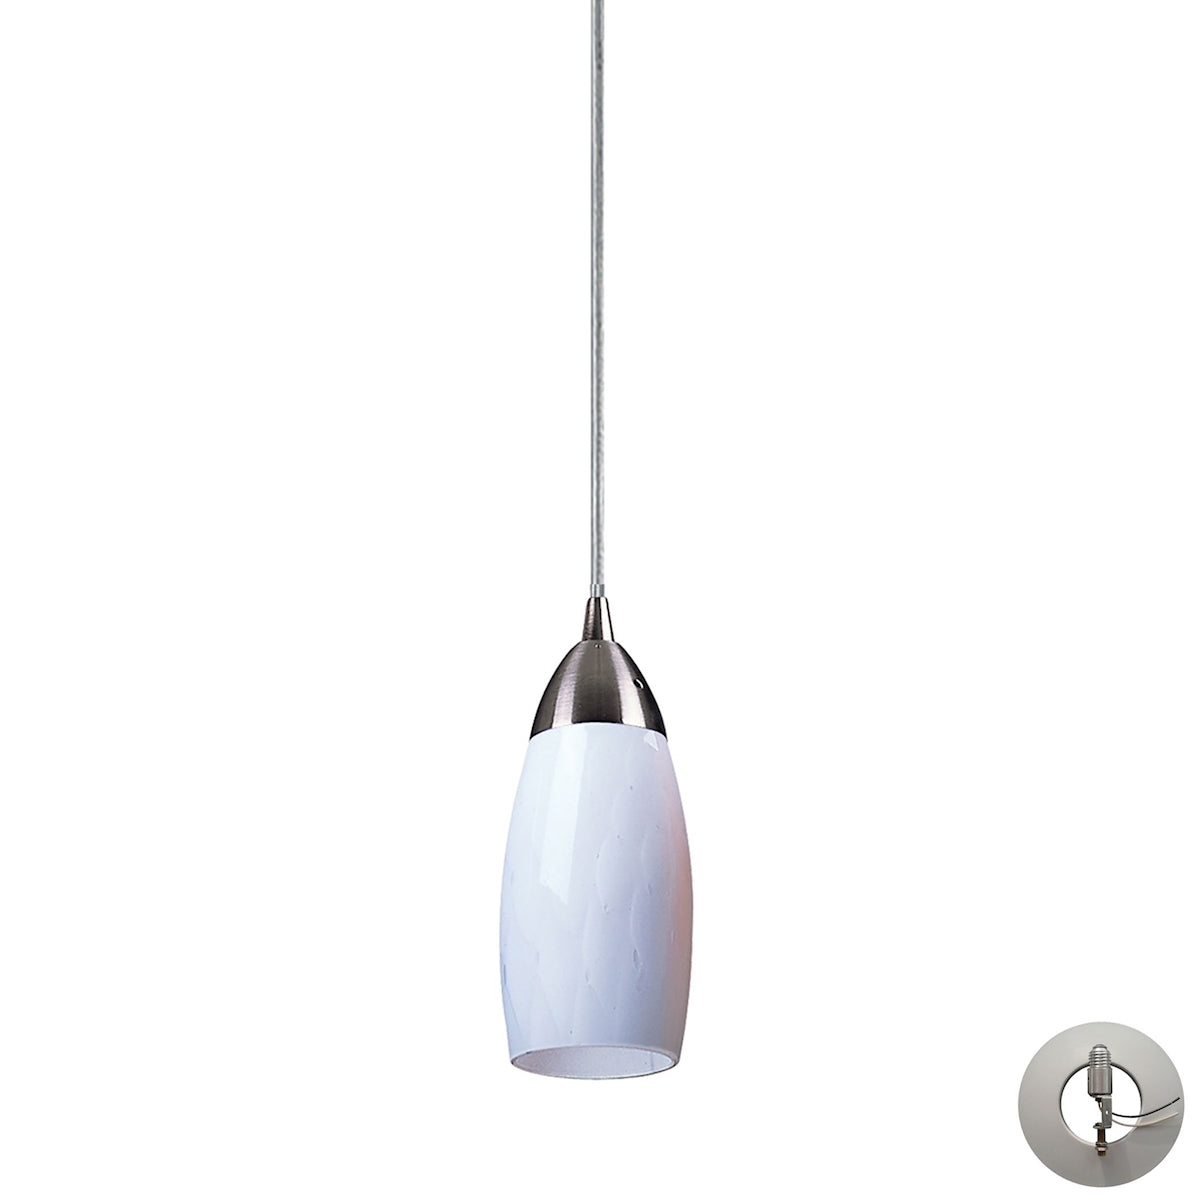 ELK Lighting 110-1WH-LA Milan 1-Light Mini Pendant in Satin Nickel with Simple White Glass - Includes Adapter Kit